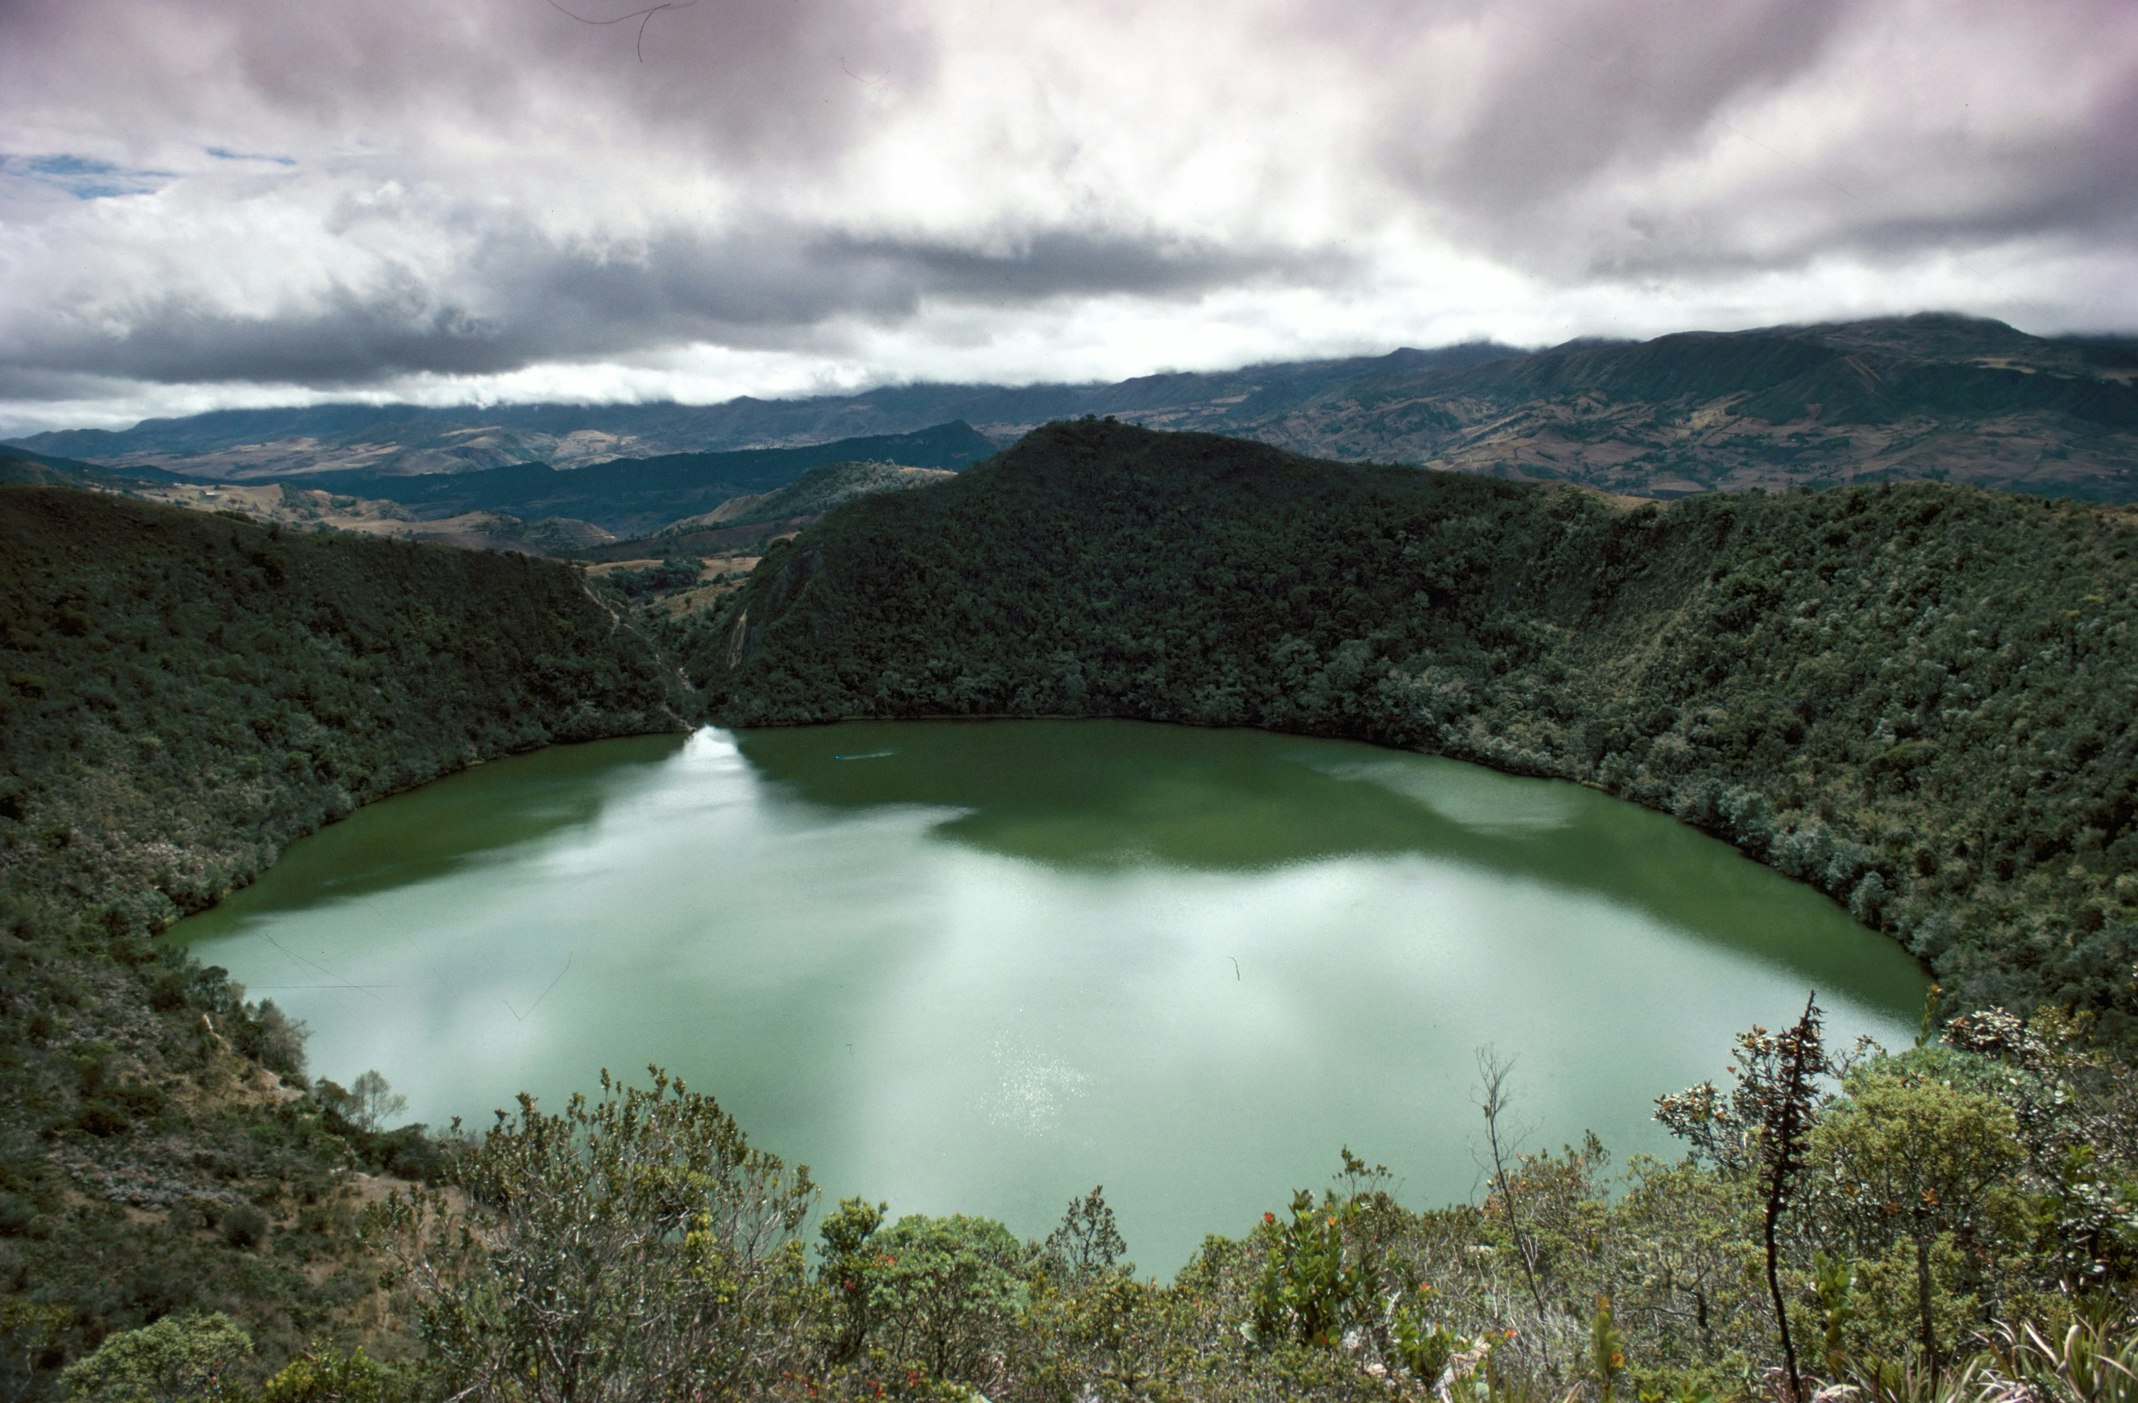 The brilliant green waters of Lake Guatavita contrast with the round cirque of mountainous terrain around the lake shot at a slight angle 